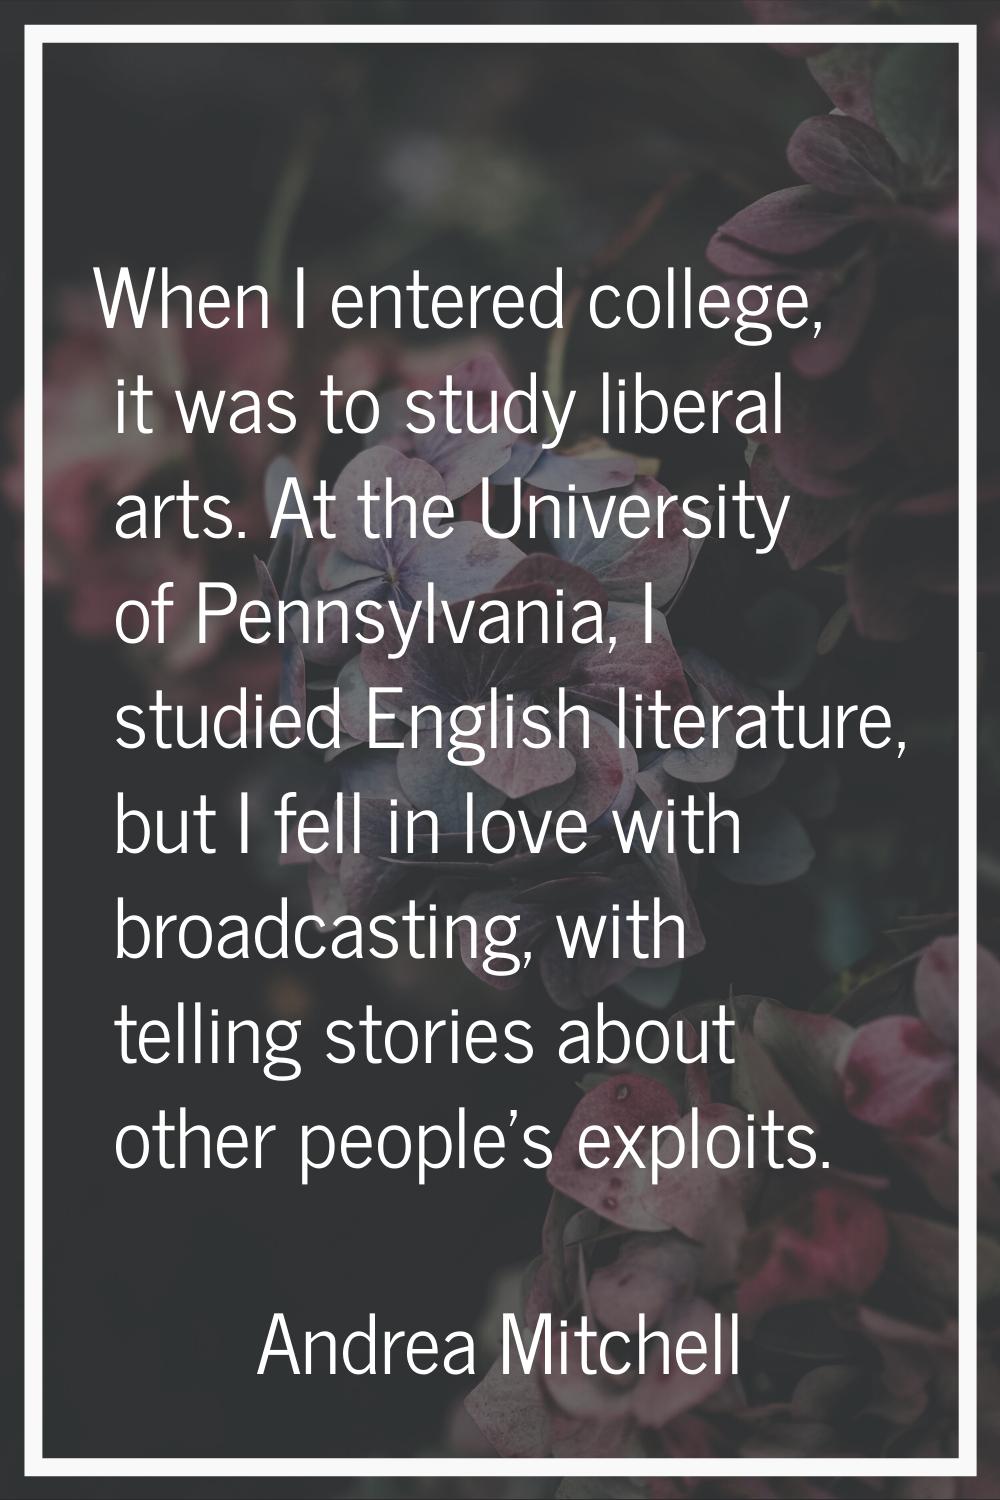 When I entered college, it was to study liberal arts. At the University of Pennsylvania, I studied 